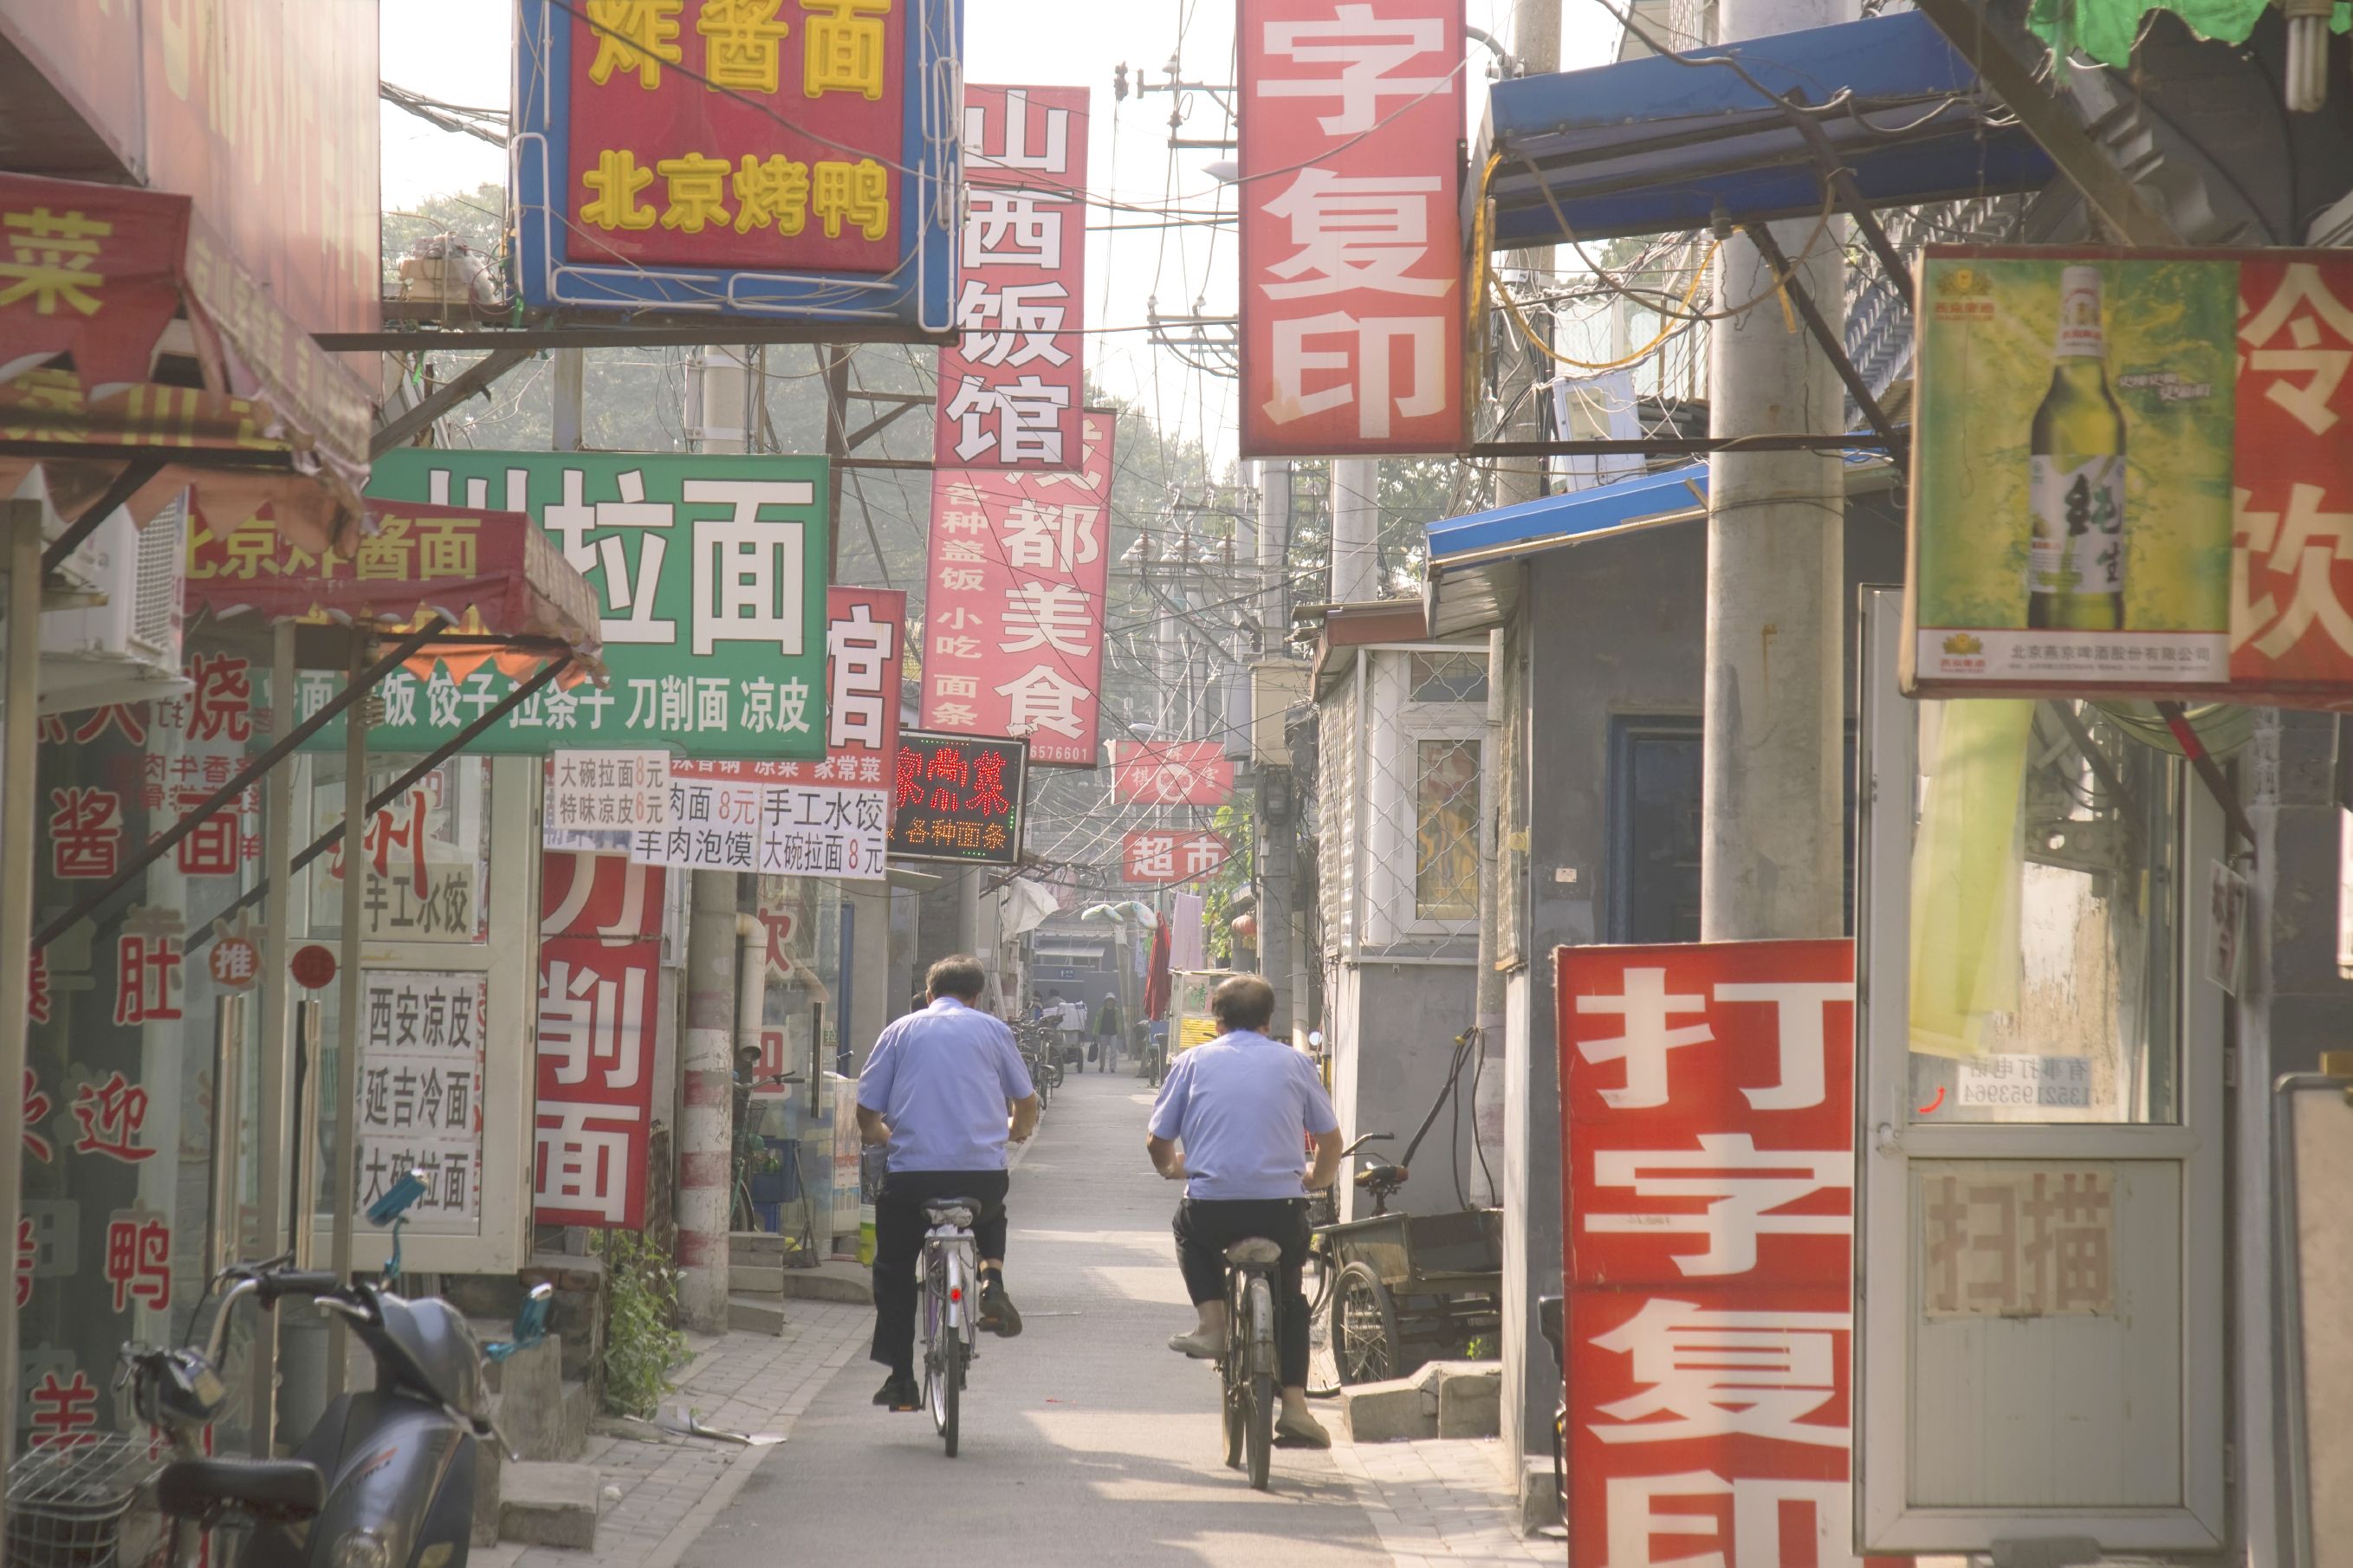 Coming up Soon: Brunch, Beijing’s bicycle culture and Bolivia’s calling